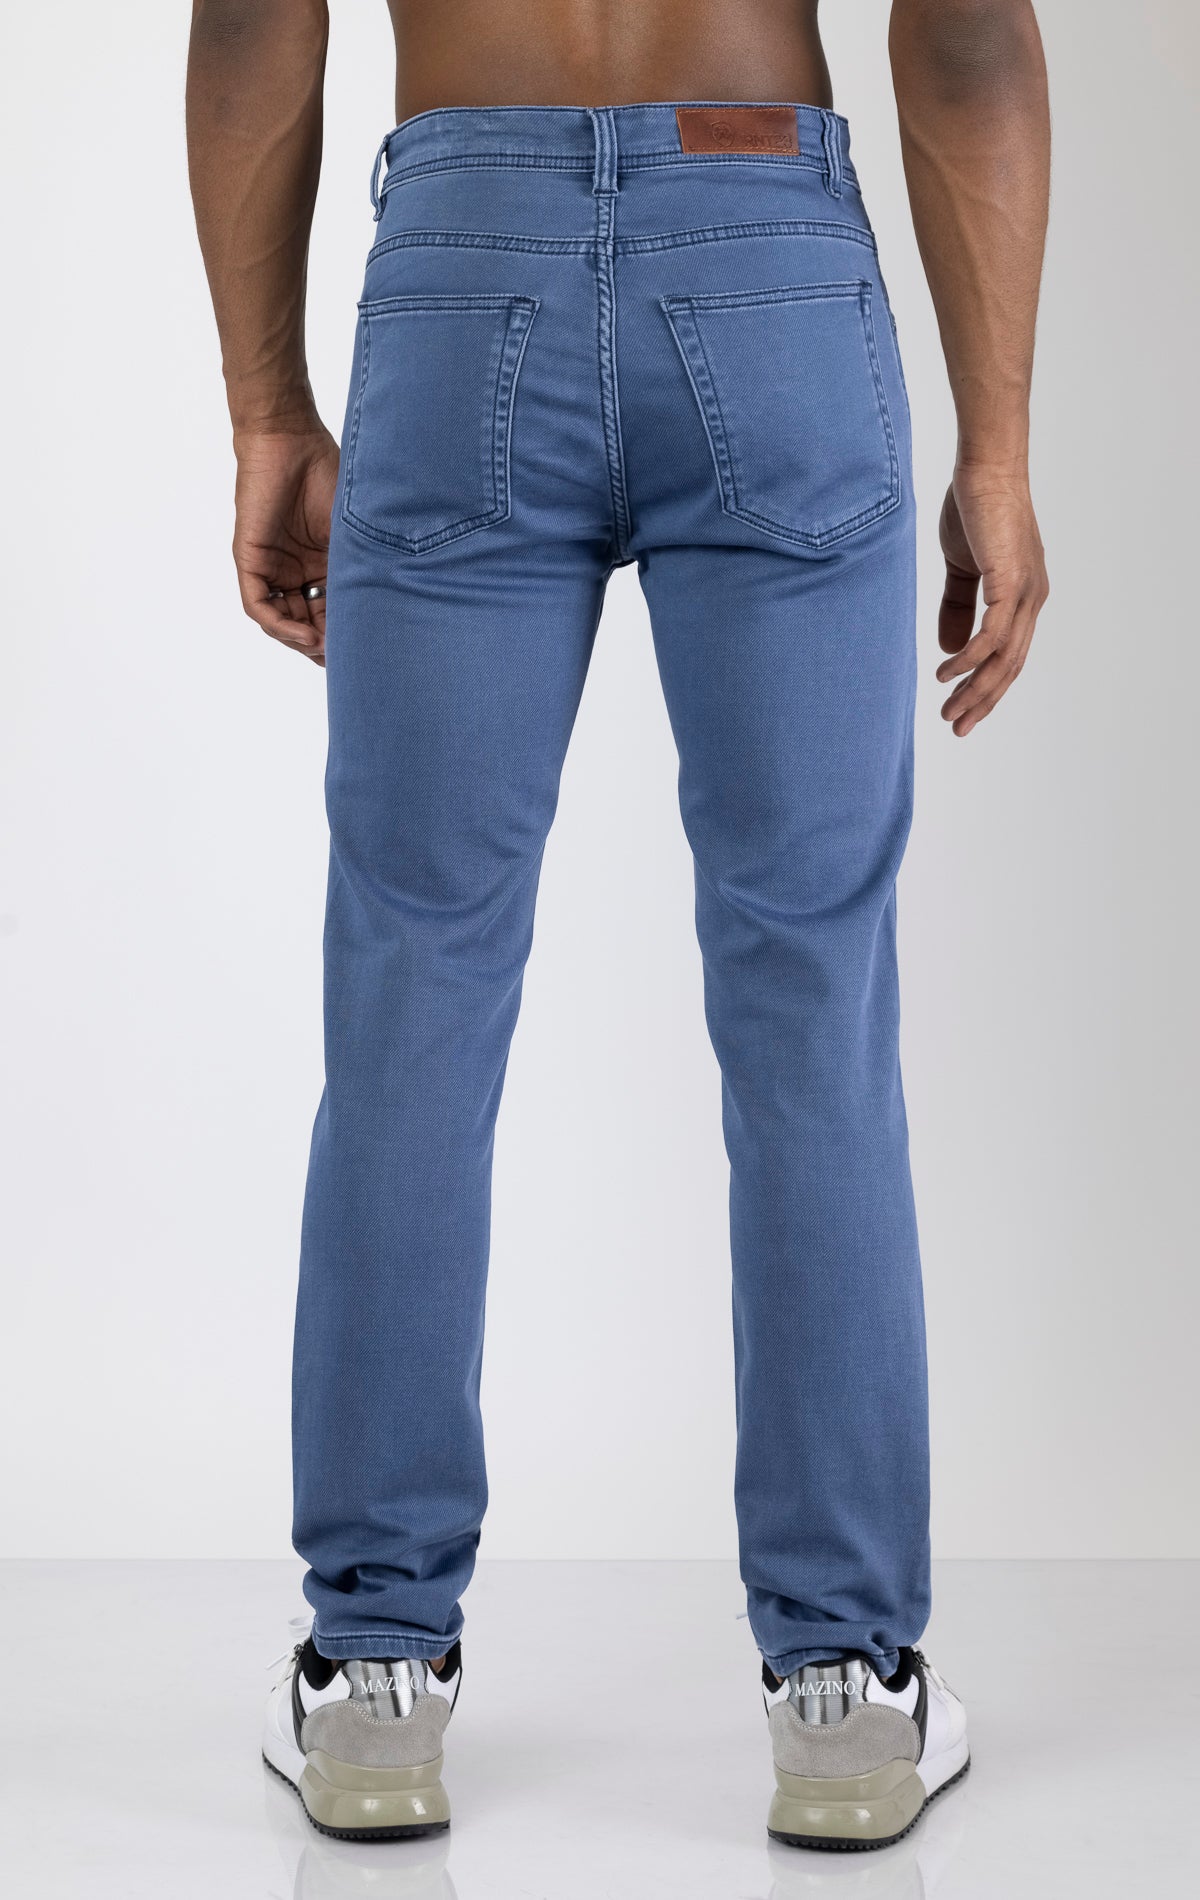 Men's super soft 5-pocket style pants in indigo color. The pants are made from a 98% cotton, 2% elastane blend and feature a tailored fit with a hint of stretch, classic 5-pocket styling (two front pockets, two back pockets, and a coin pocket).